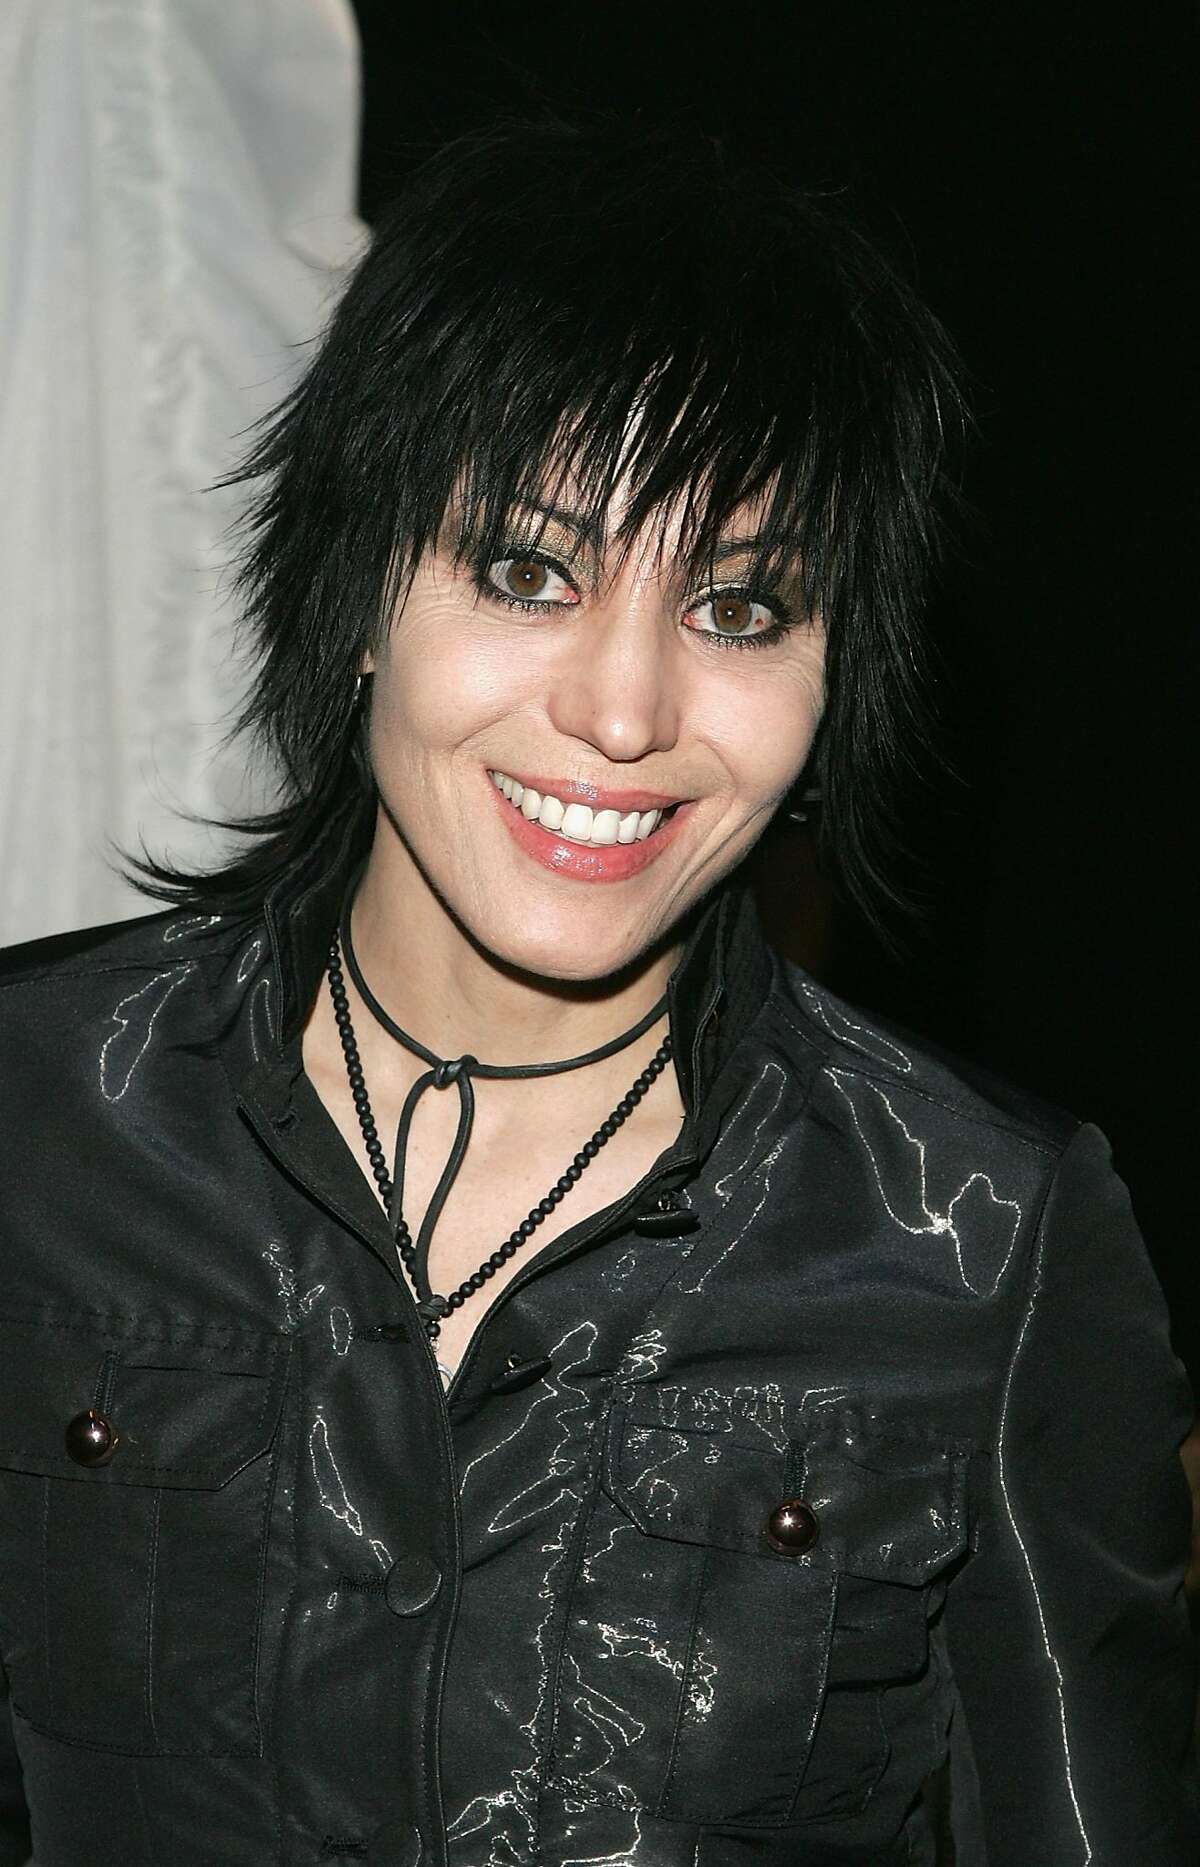 NEW YORK - FEBRUARY 06: Singer Joan Jett poses in the front row at the Betsey Johnson Fall 2007 fashion show during Mercedes-Benz Fashion Week in the Tent in Bryant Park February 6, 2007 in New York City. (Photo by Peter Kramer/Getty Images For IMG) *** Local Caption *** Joan Jett